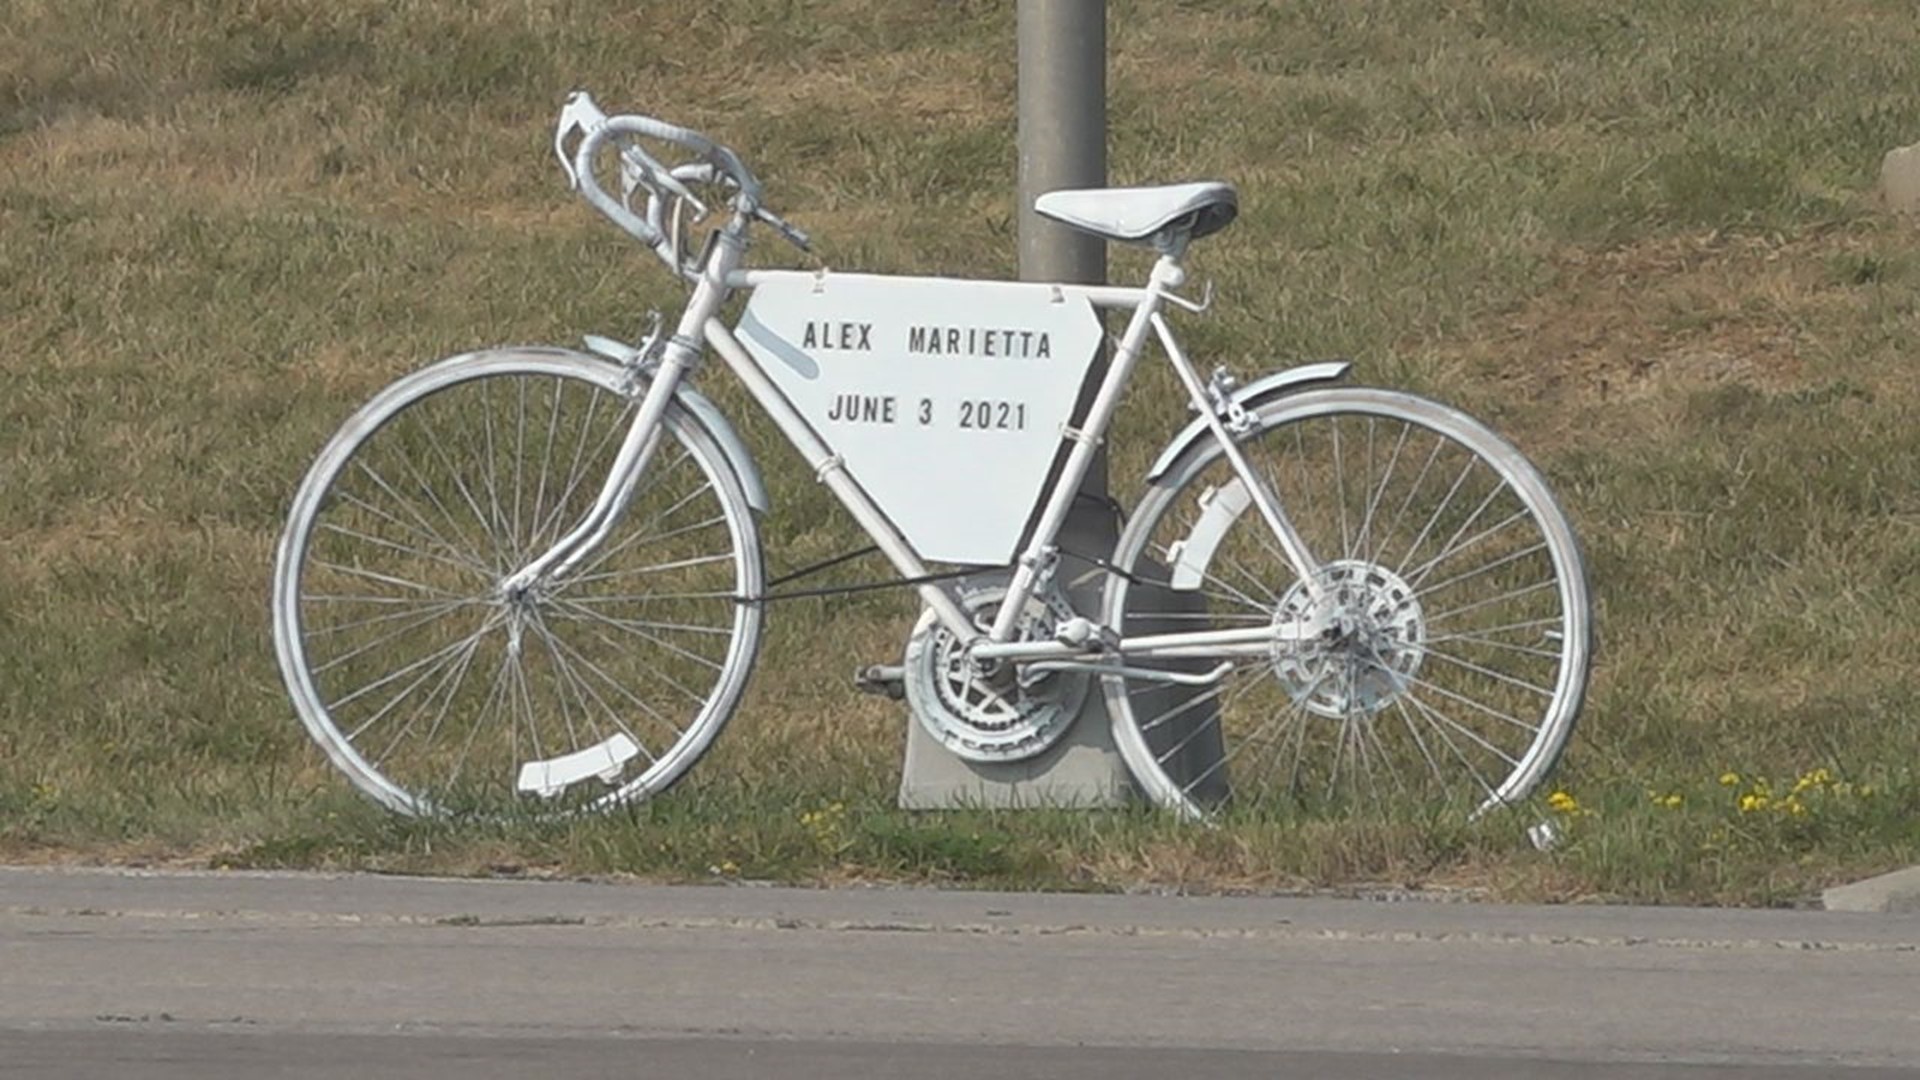 Two years later, family and friends remember Alex Marietta with an anonymously donated 'ghost bike,' placed where the accident happened on Kimberly Road.